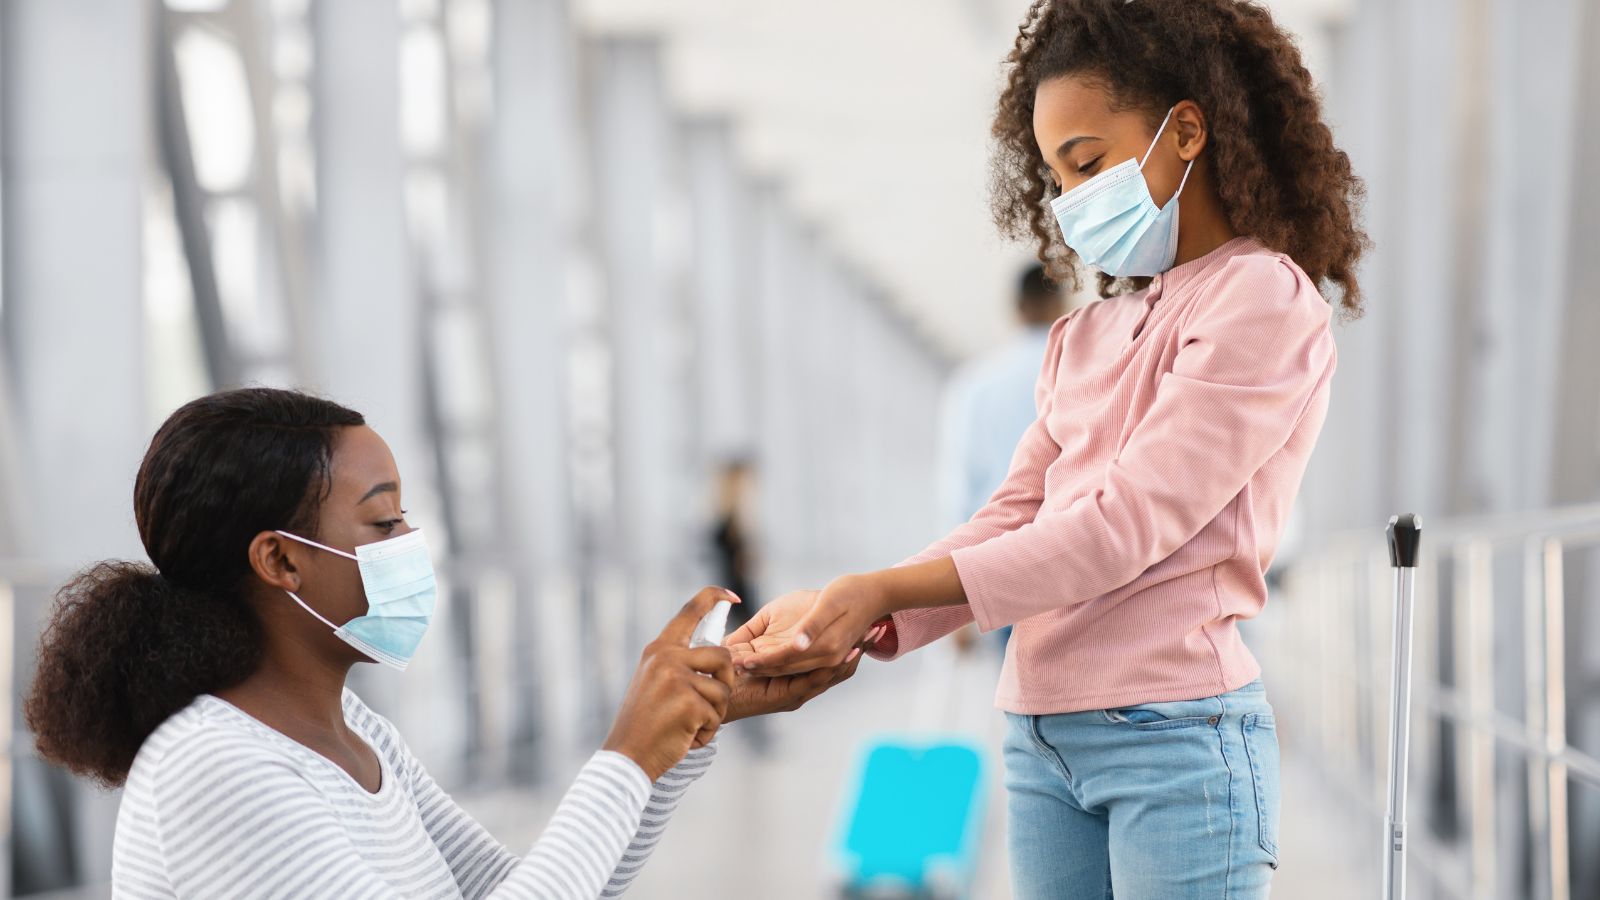 Teen girl and mother using hand sanitizer at the airport (Photo: Shutterstock)